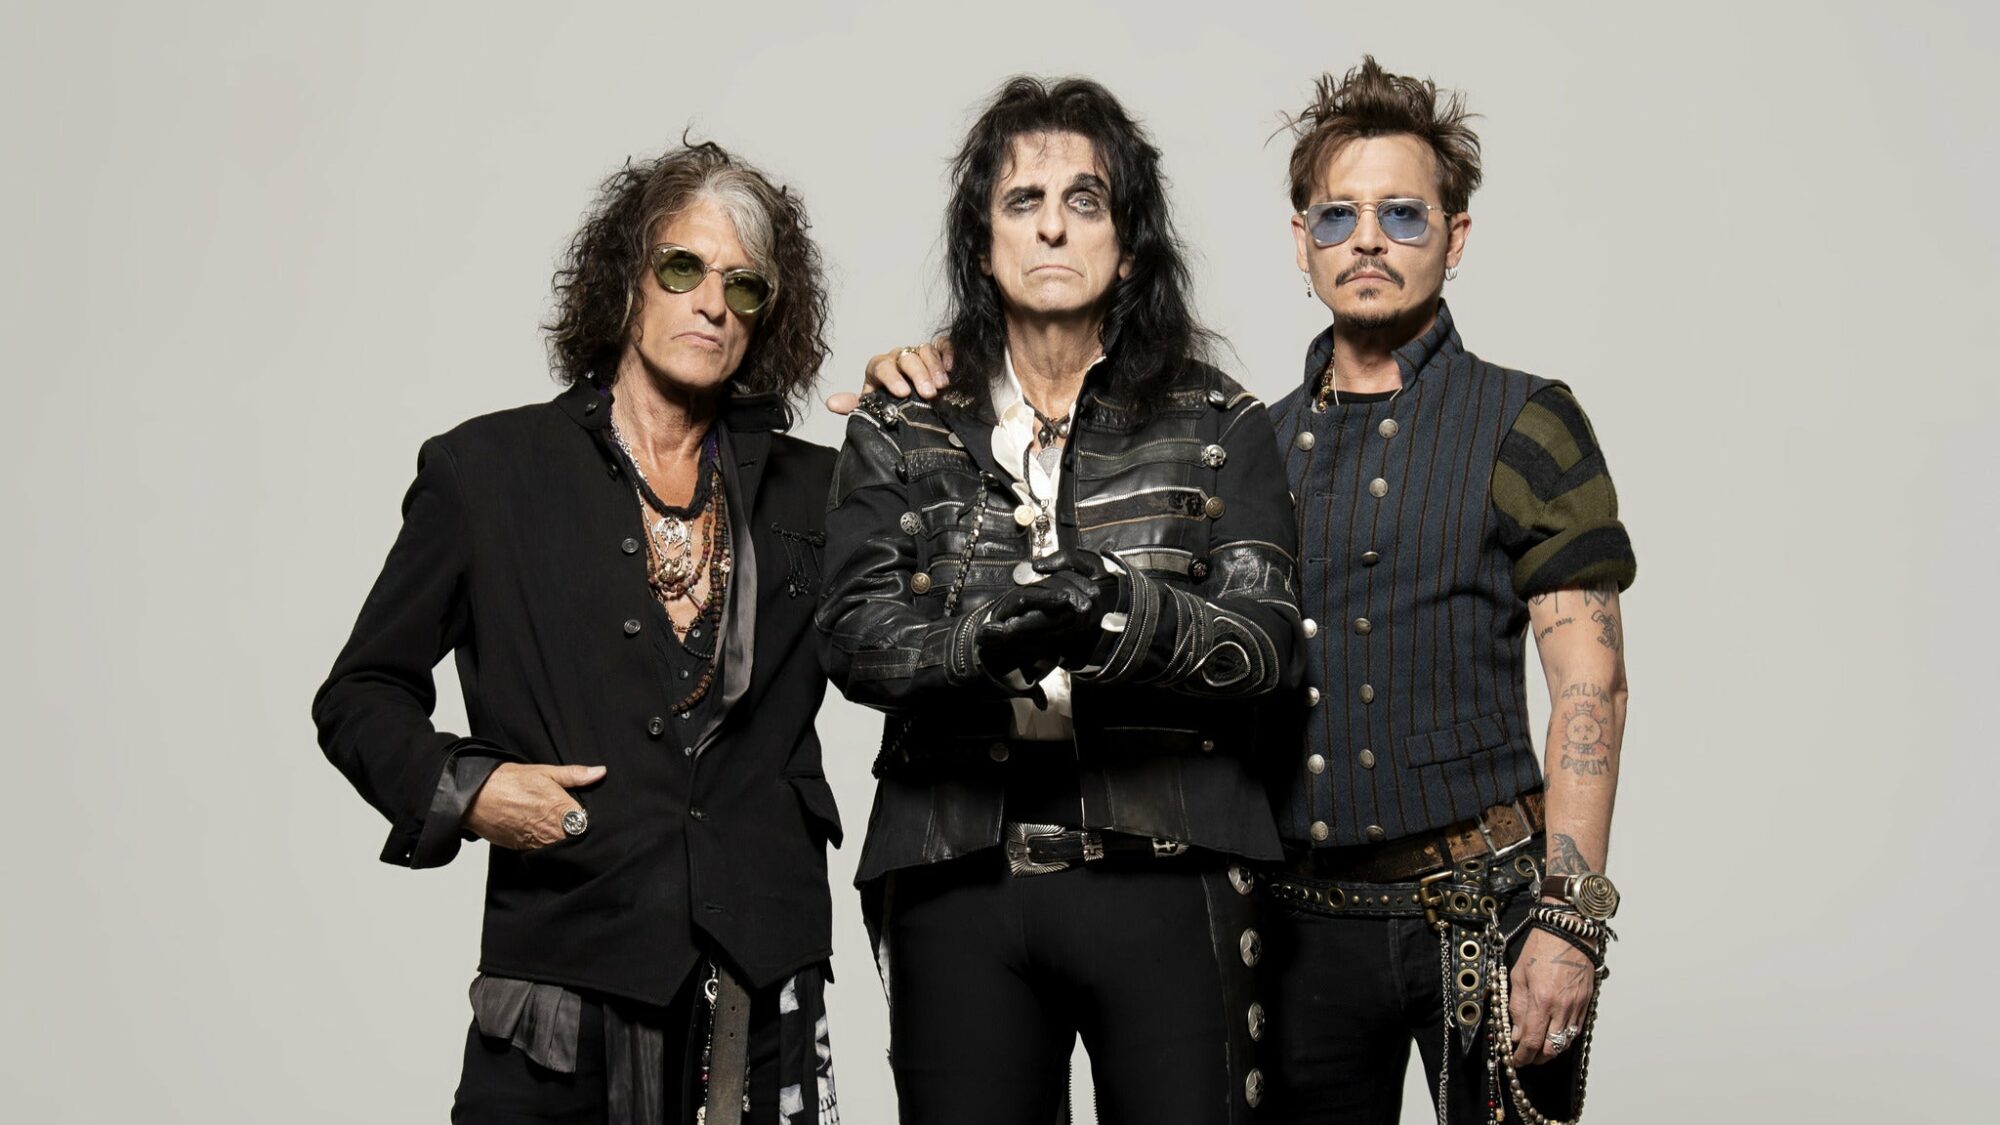 Image name Hollywood Vampires Ticket Hotel Packages at Scarborough Open Air Theatre Scarborough the 1 image from the post Hollywood Vampires - Ticket + Hotel Packages at Scarborough Open Air Theatre, Scarborough in Yorkshire.com.